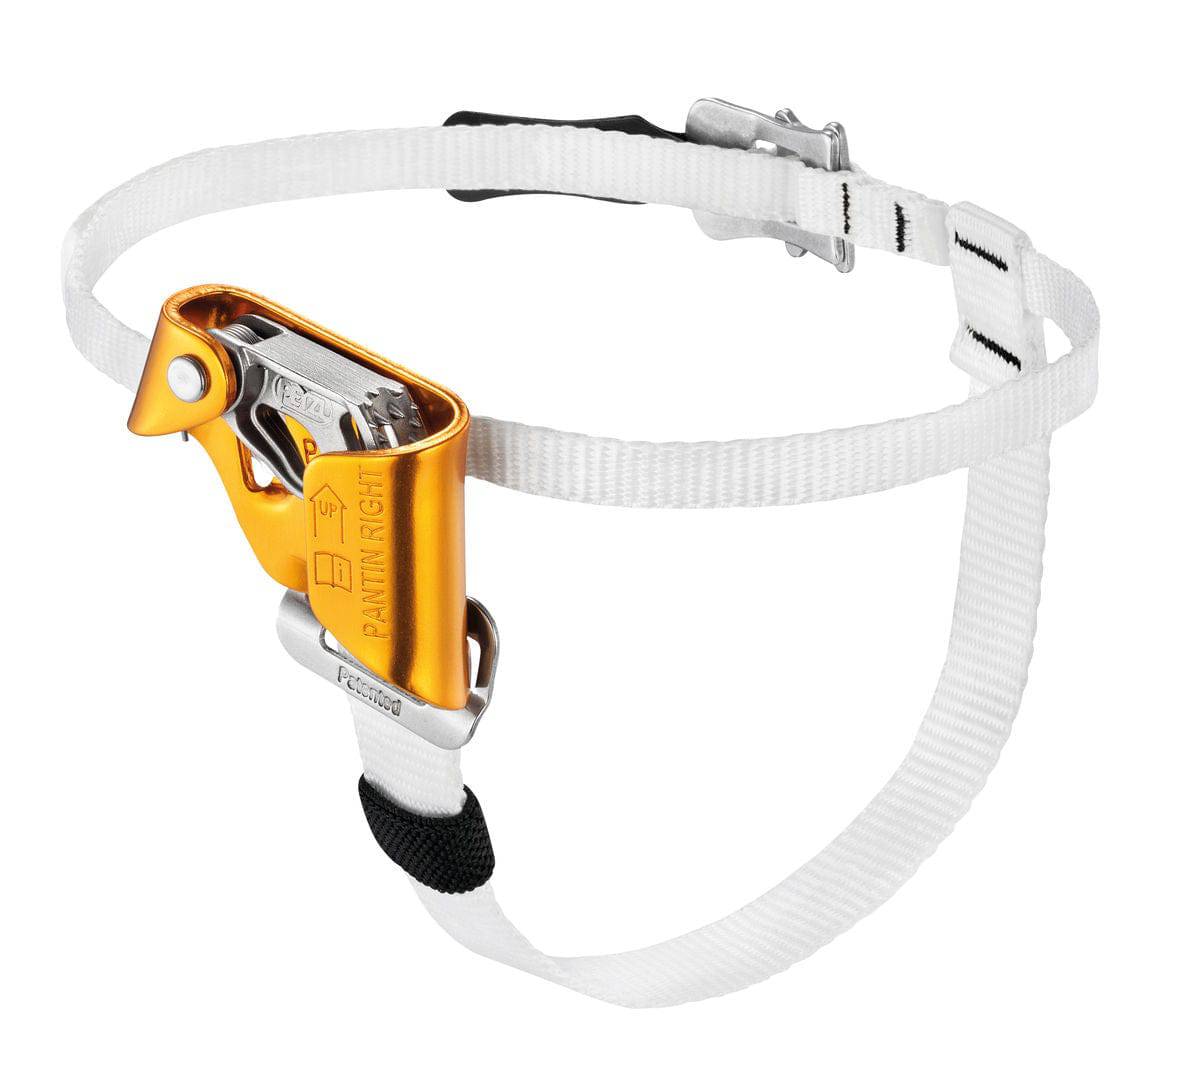 Petzl PANTIN Rope Ascent Foot Ascender - SecureHeights